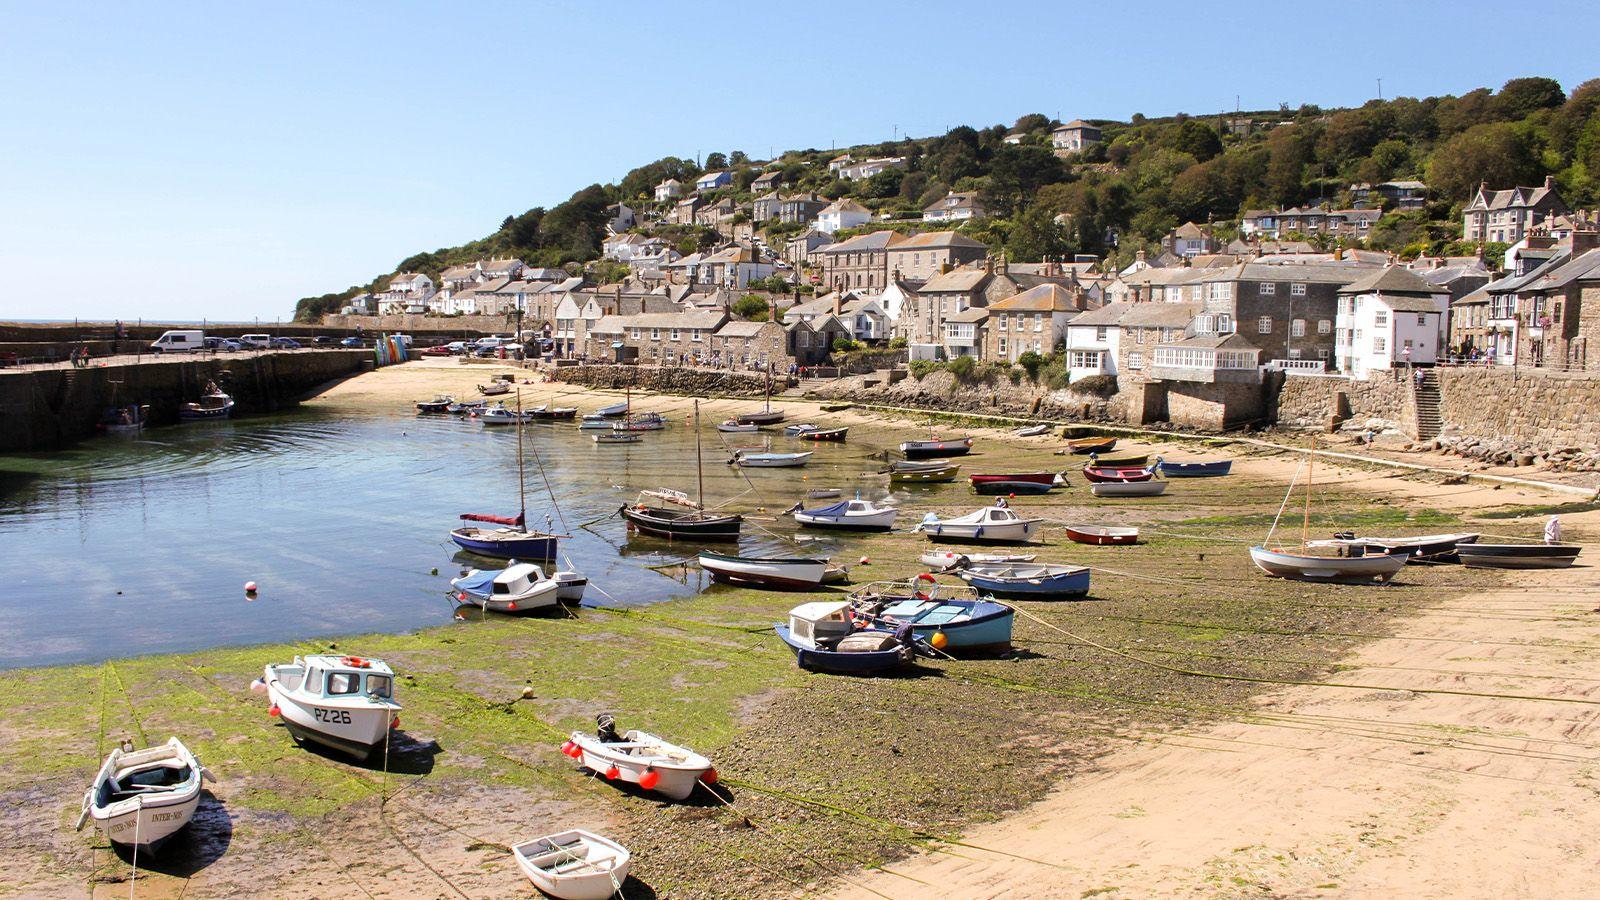 A view of St Ives beach with houses and boats